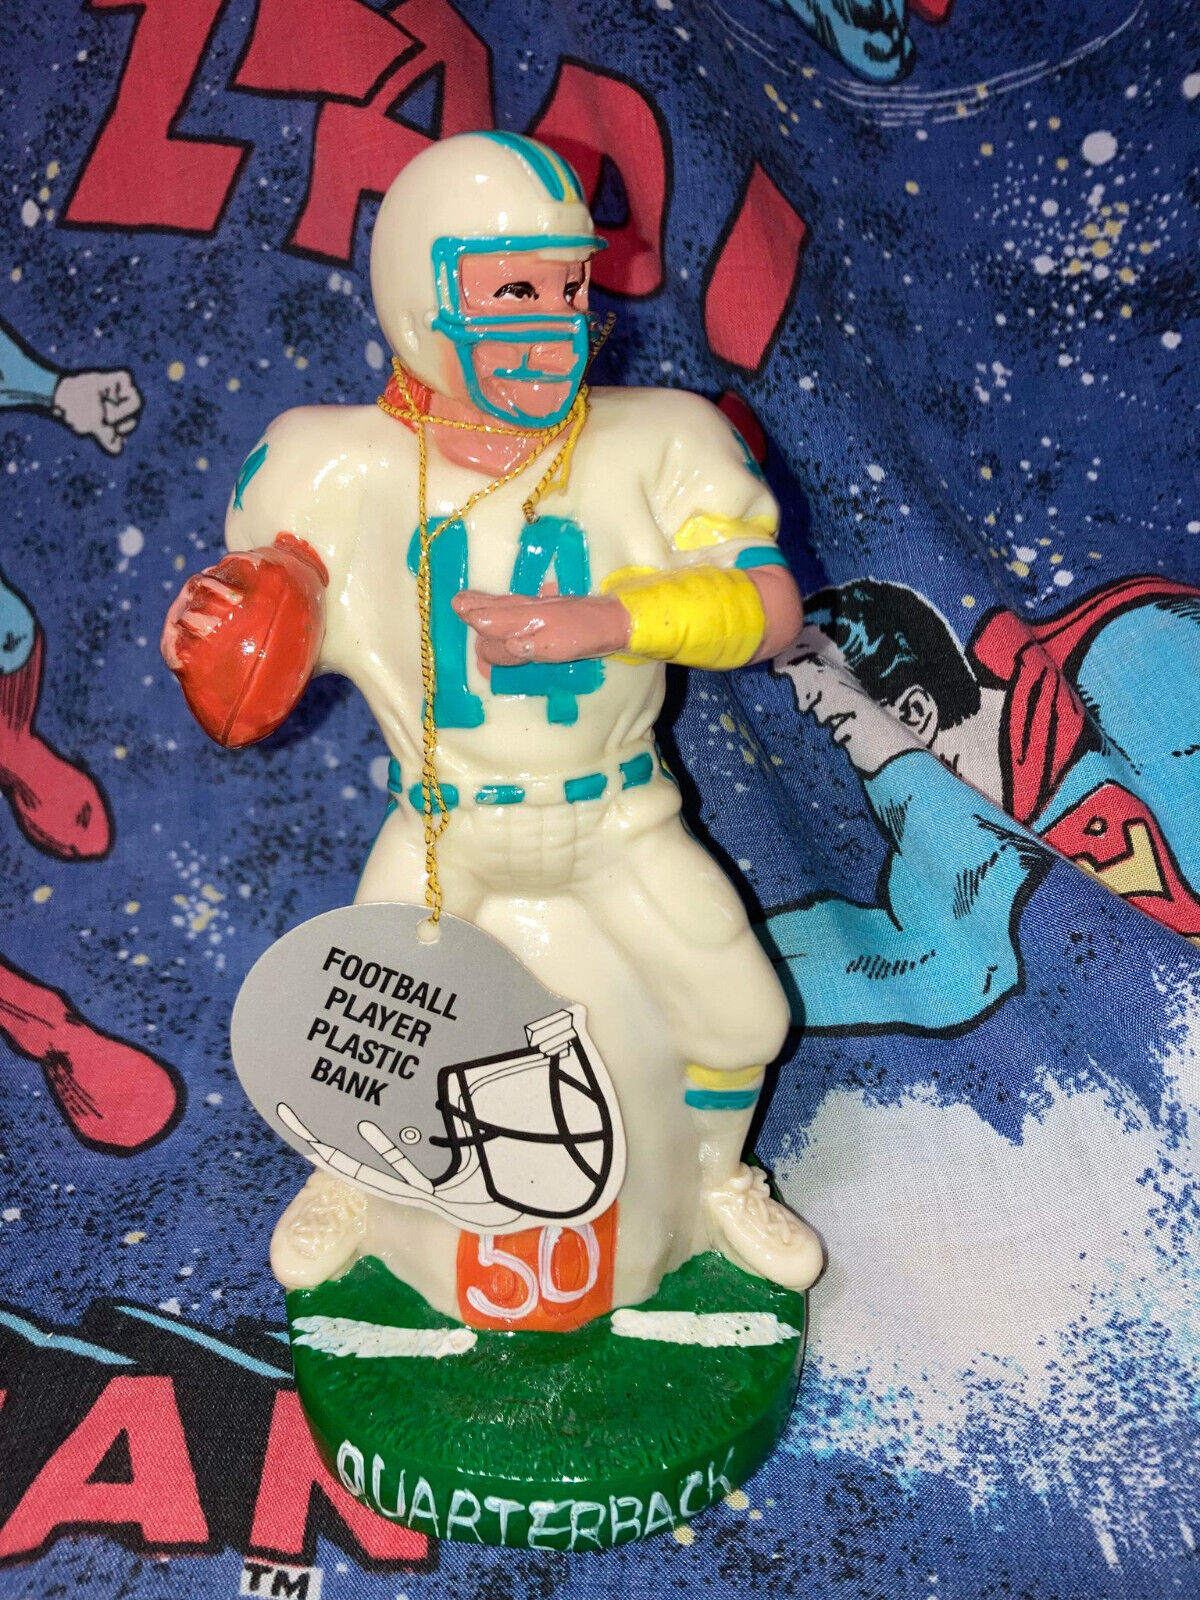 Vintage 1988 Quarterback Bank Football Small World Import Bank with Tag Item 320